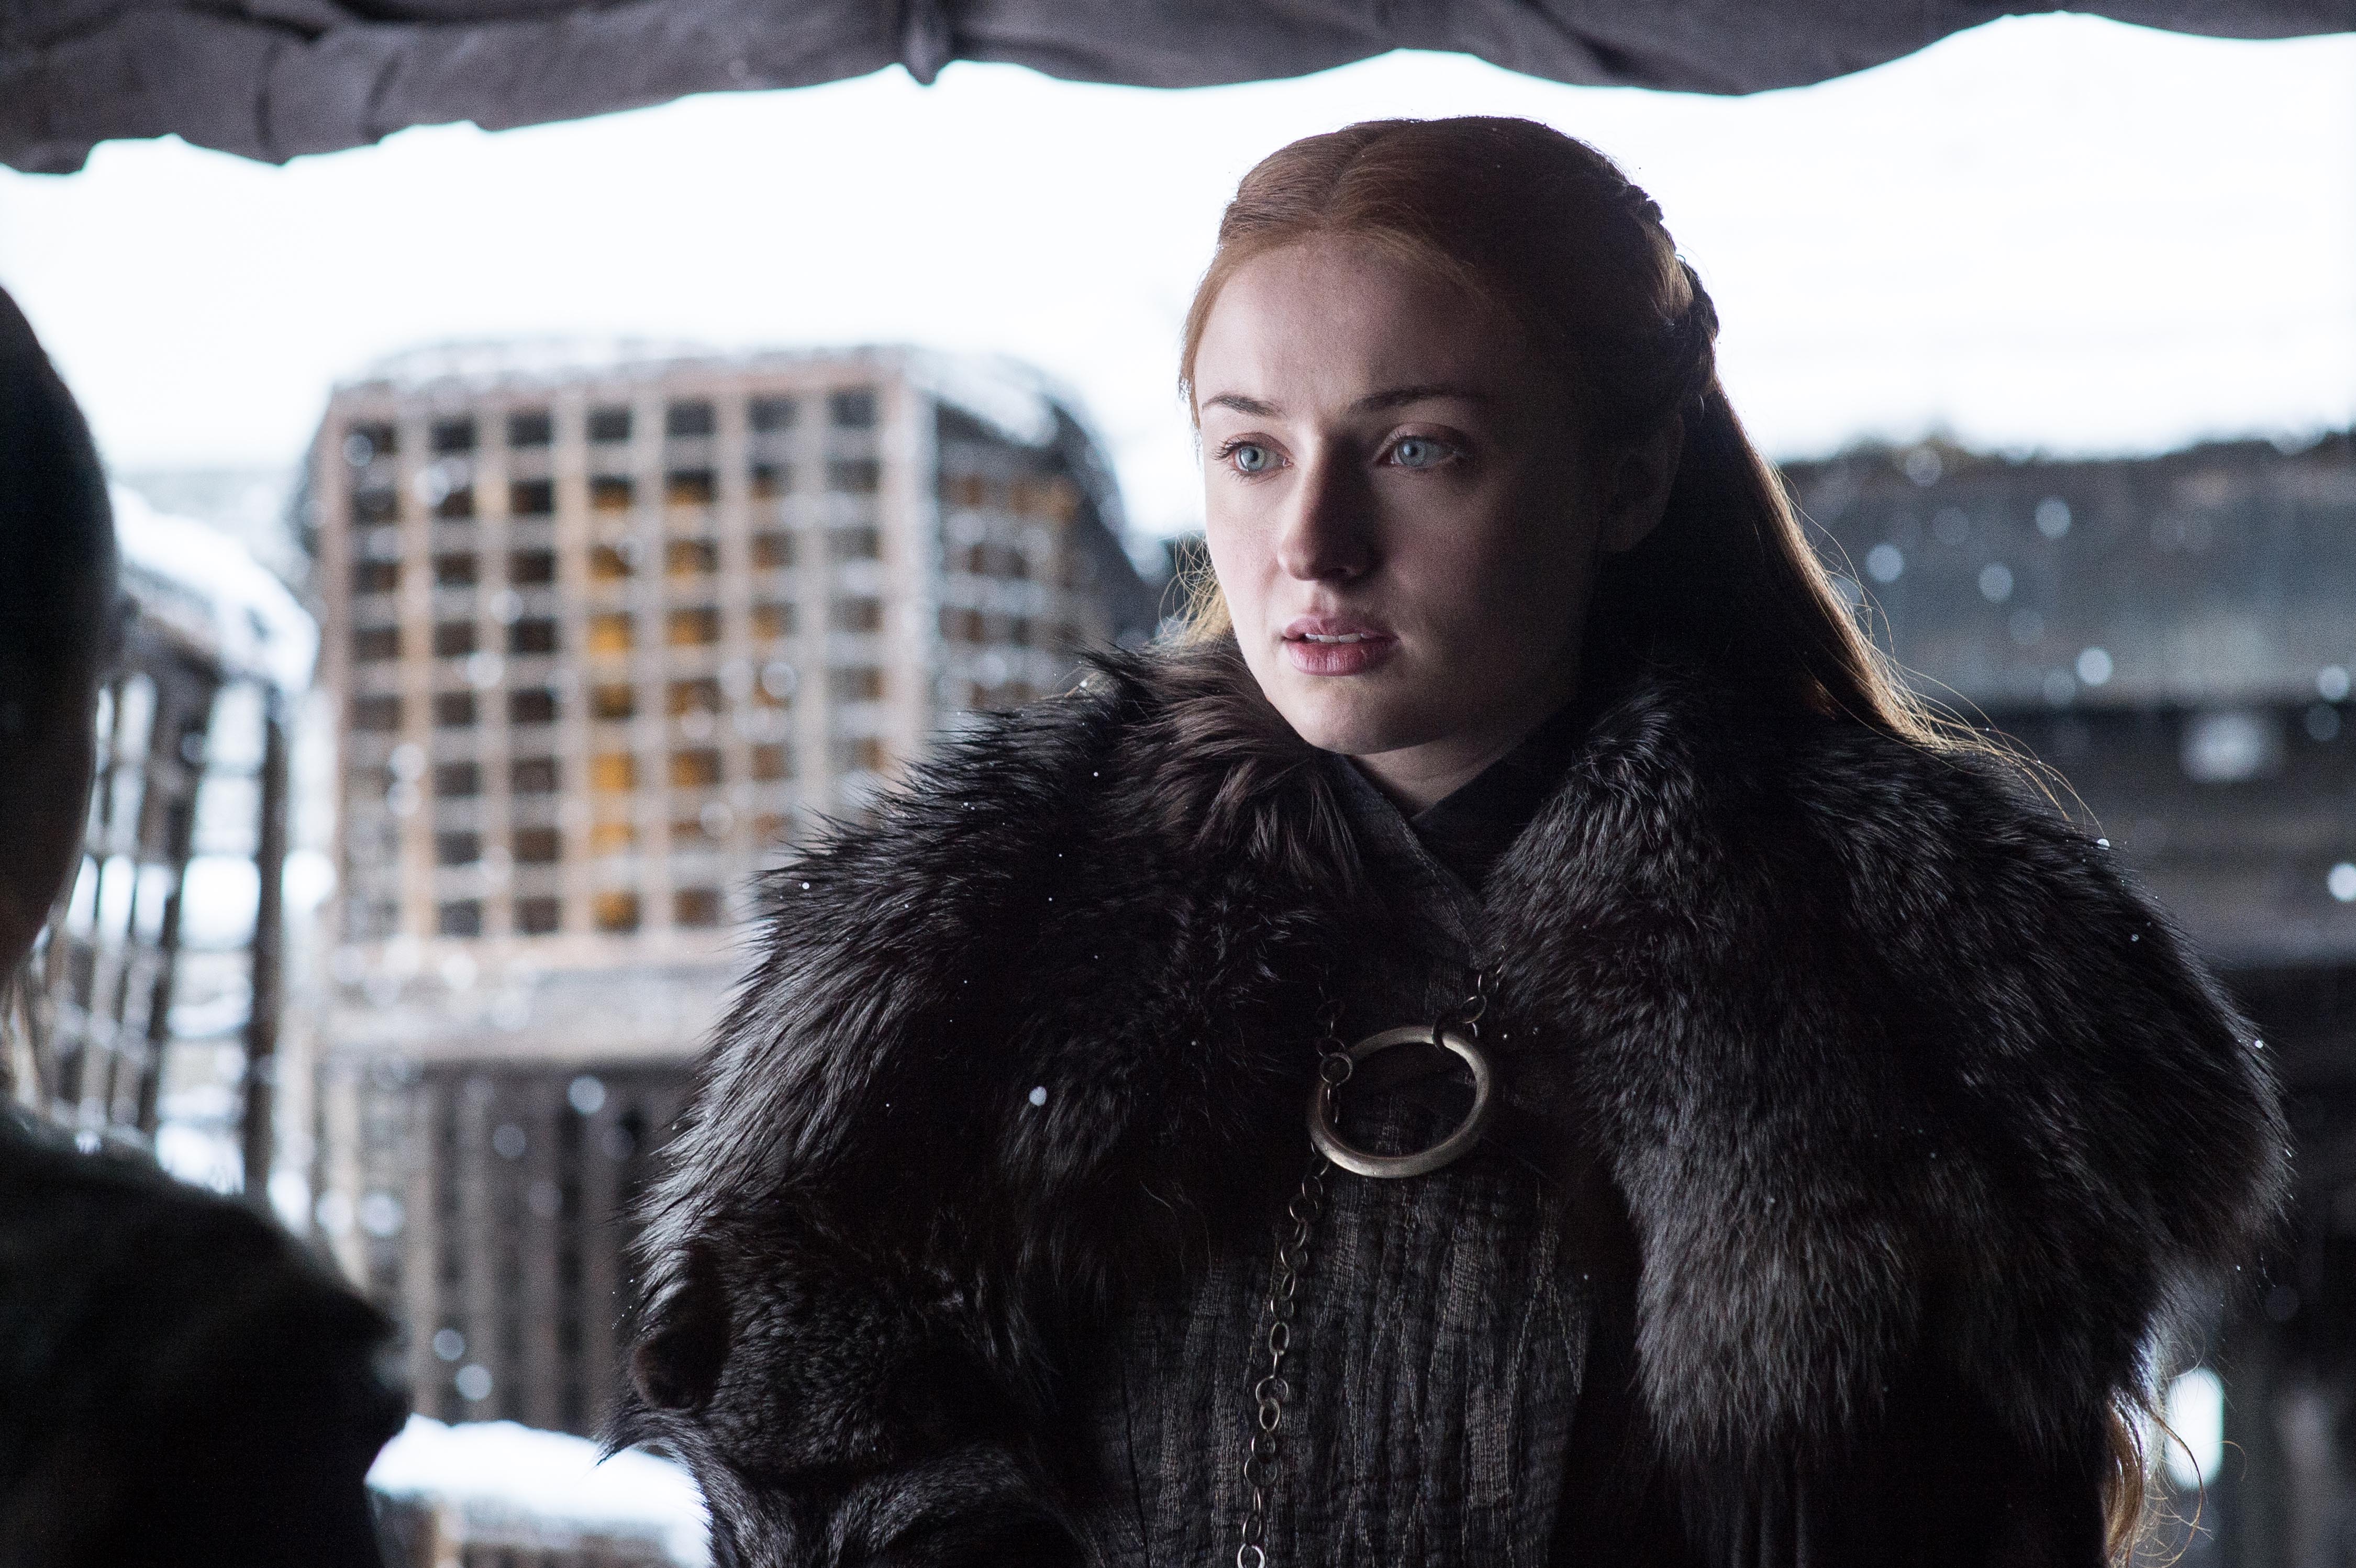 Sansa at Winterfell, in tonight's episode "Beyond the Wall"